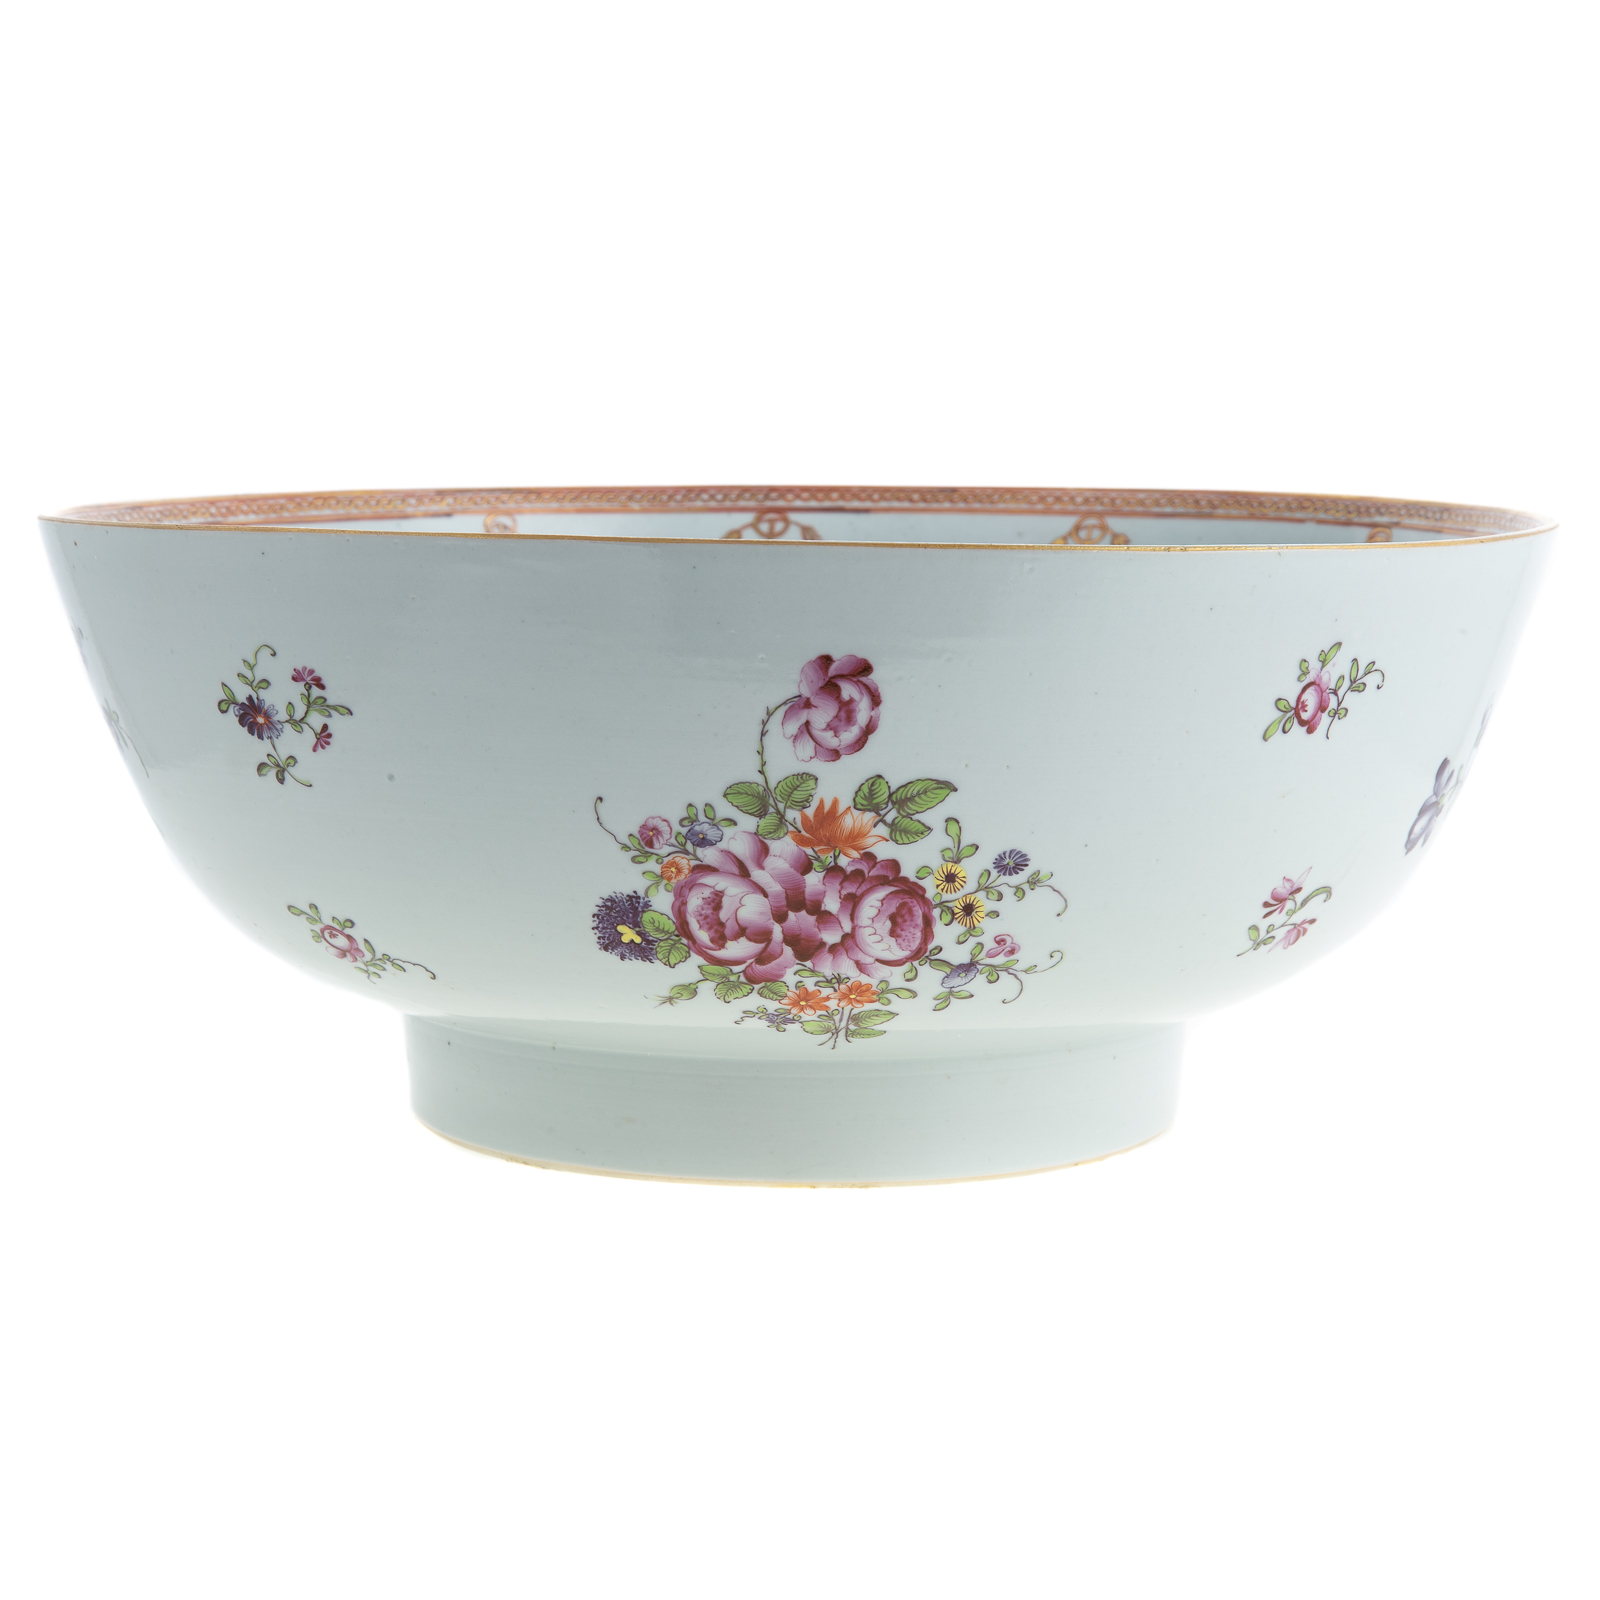 CHINESE EXPORT FOOTED PUNCHBOWL